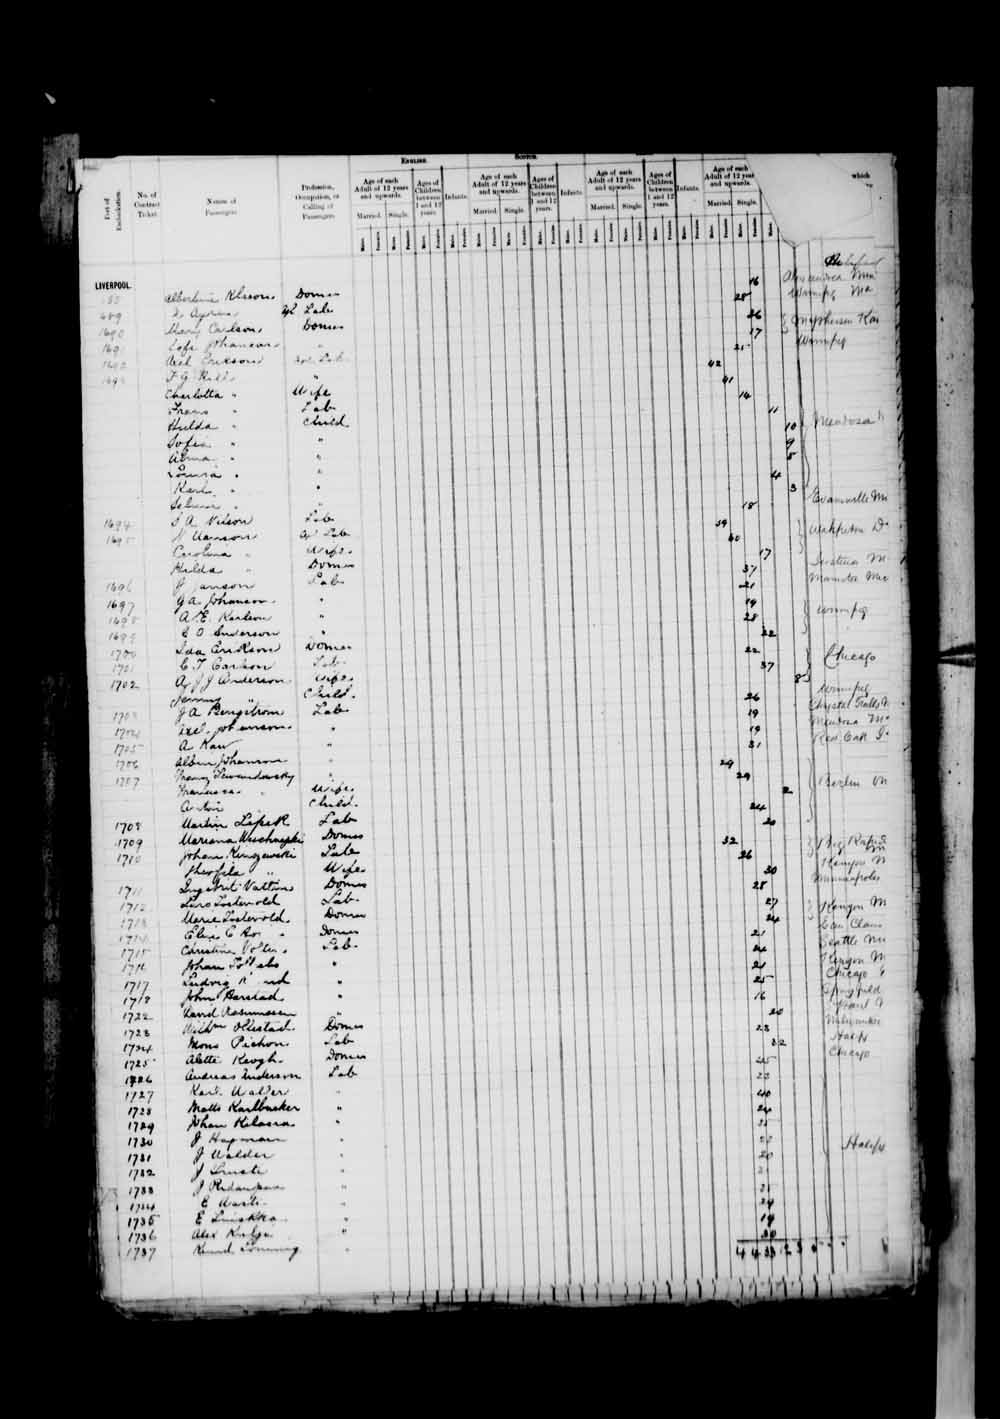 Digitized page of Passenger Lists for Image No.: e003674940